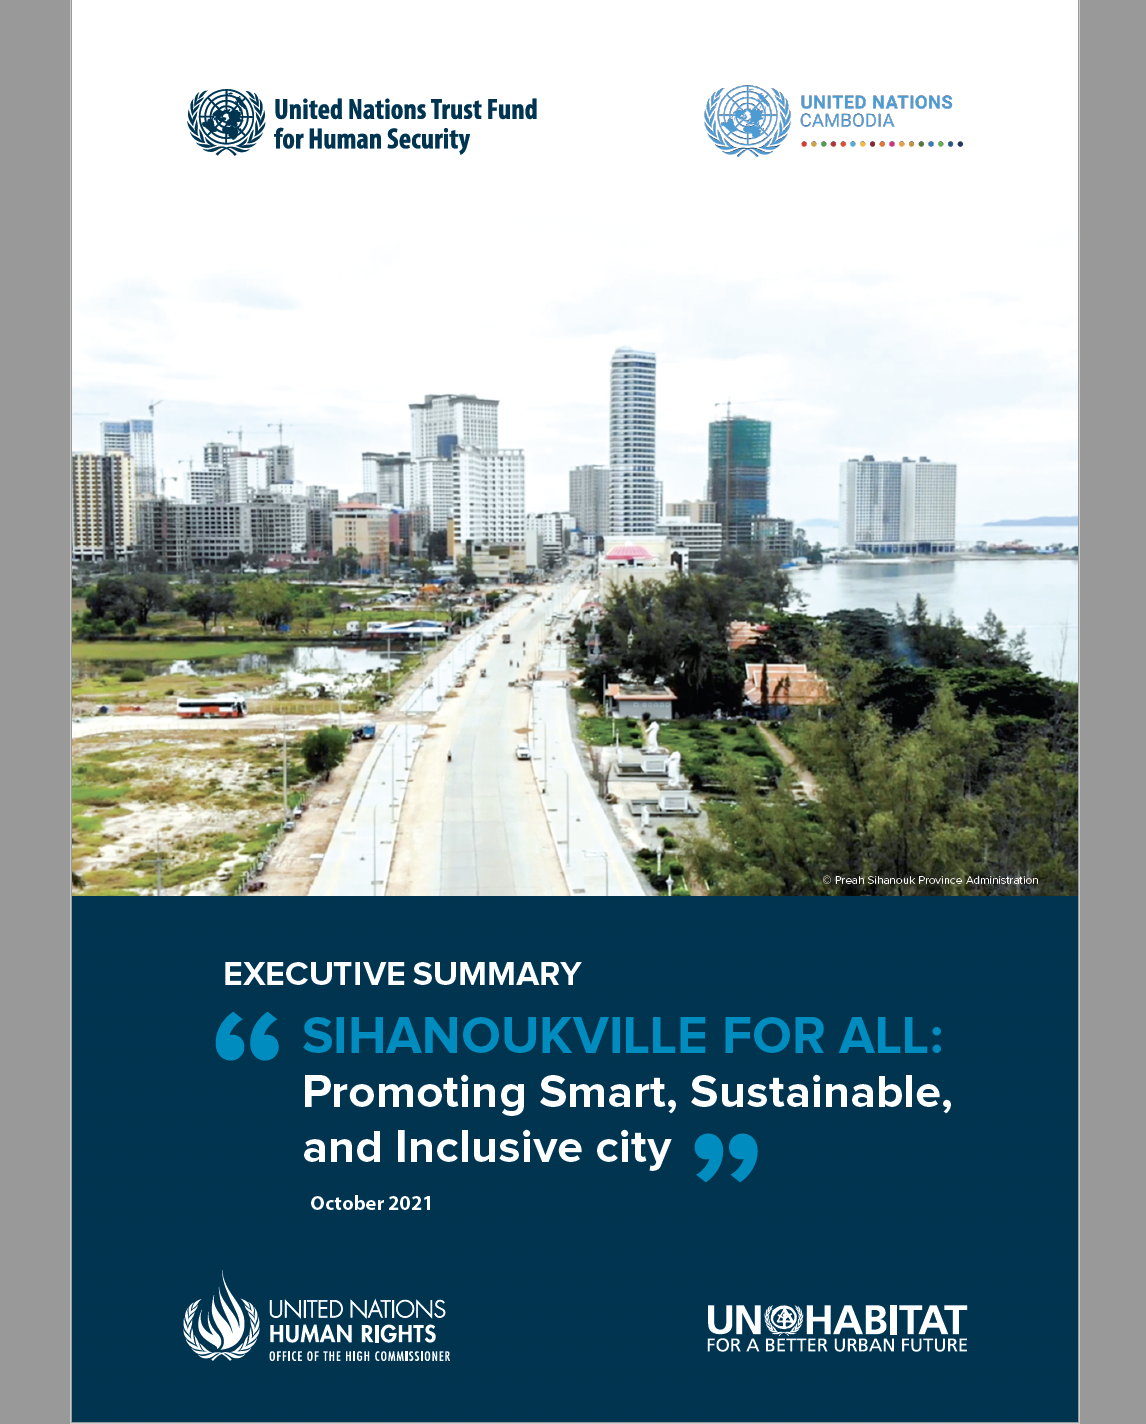 SIHANOUKVILLE FOR ALL: Promoting Smart, Sustainable, and Inclusive City